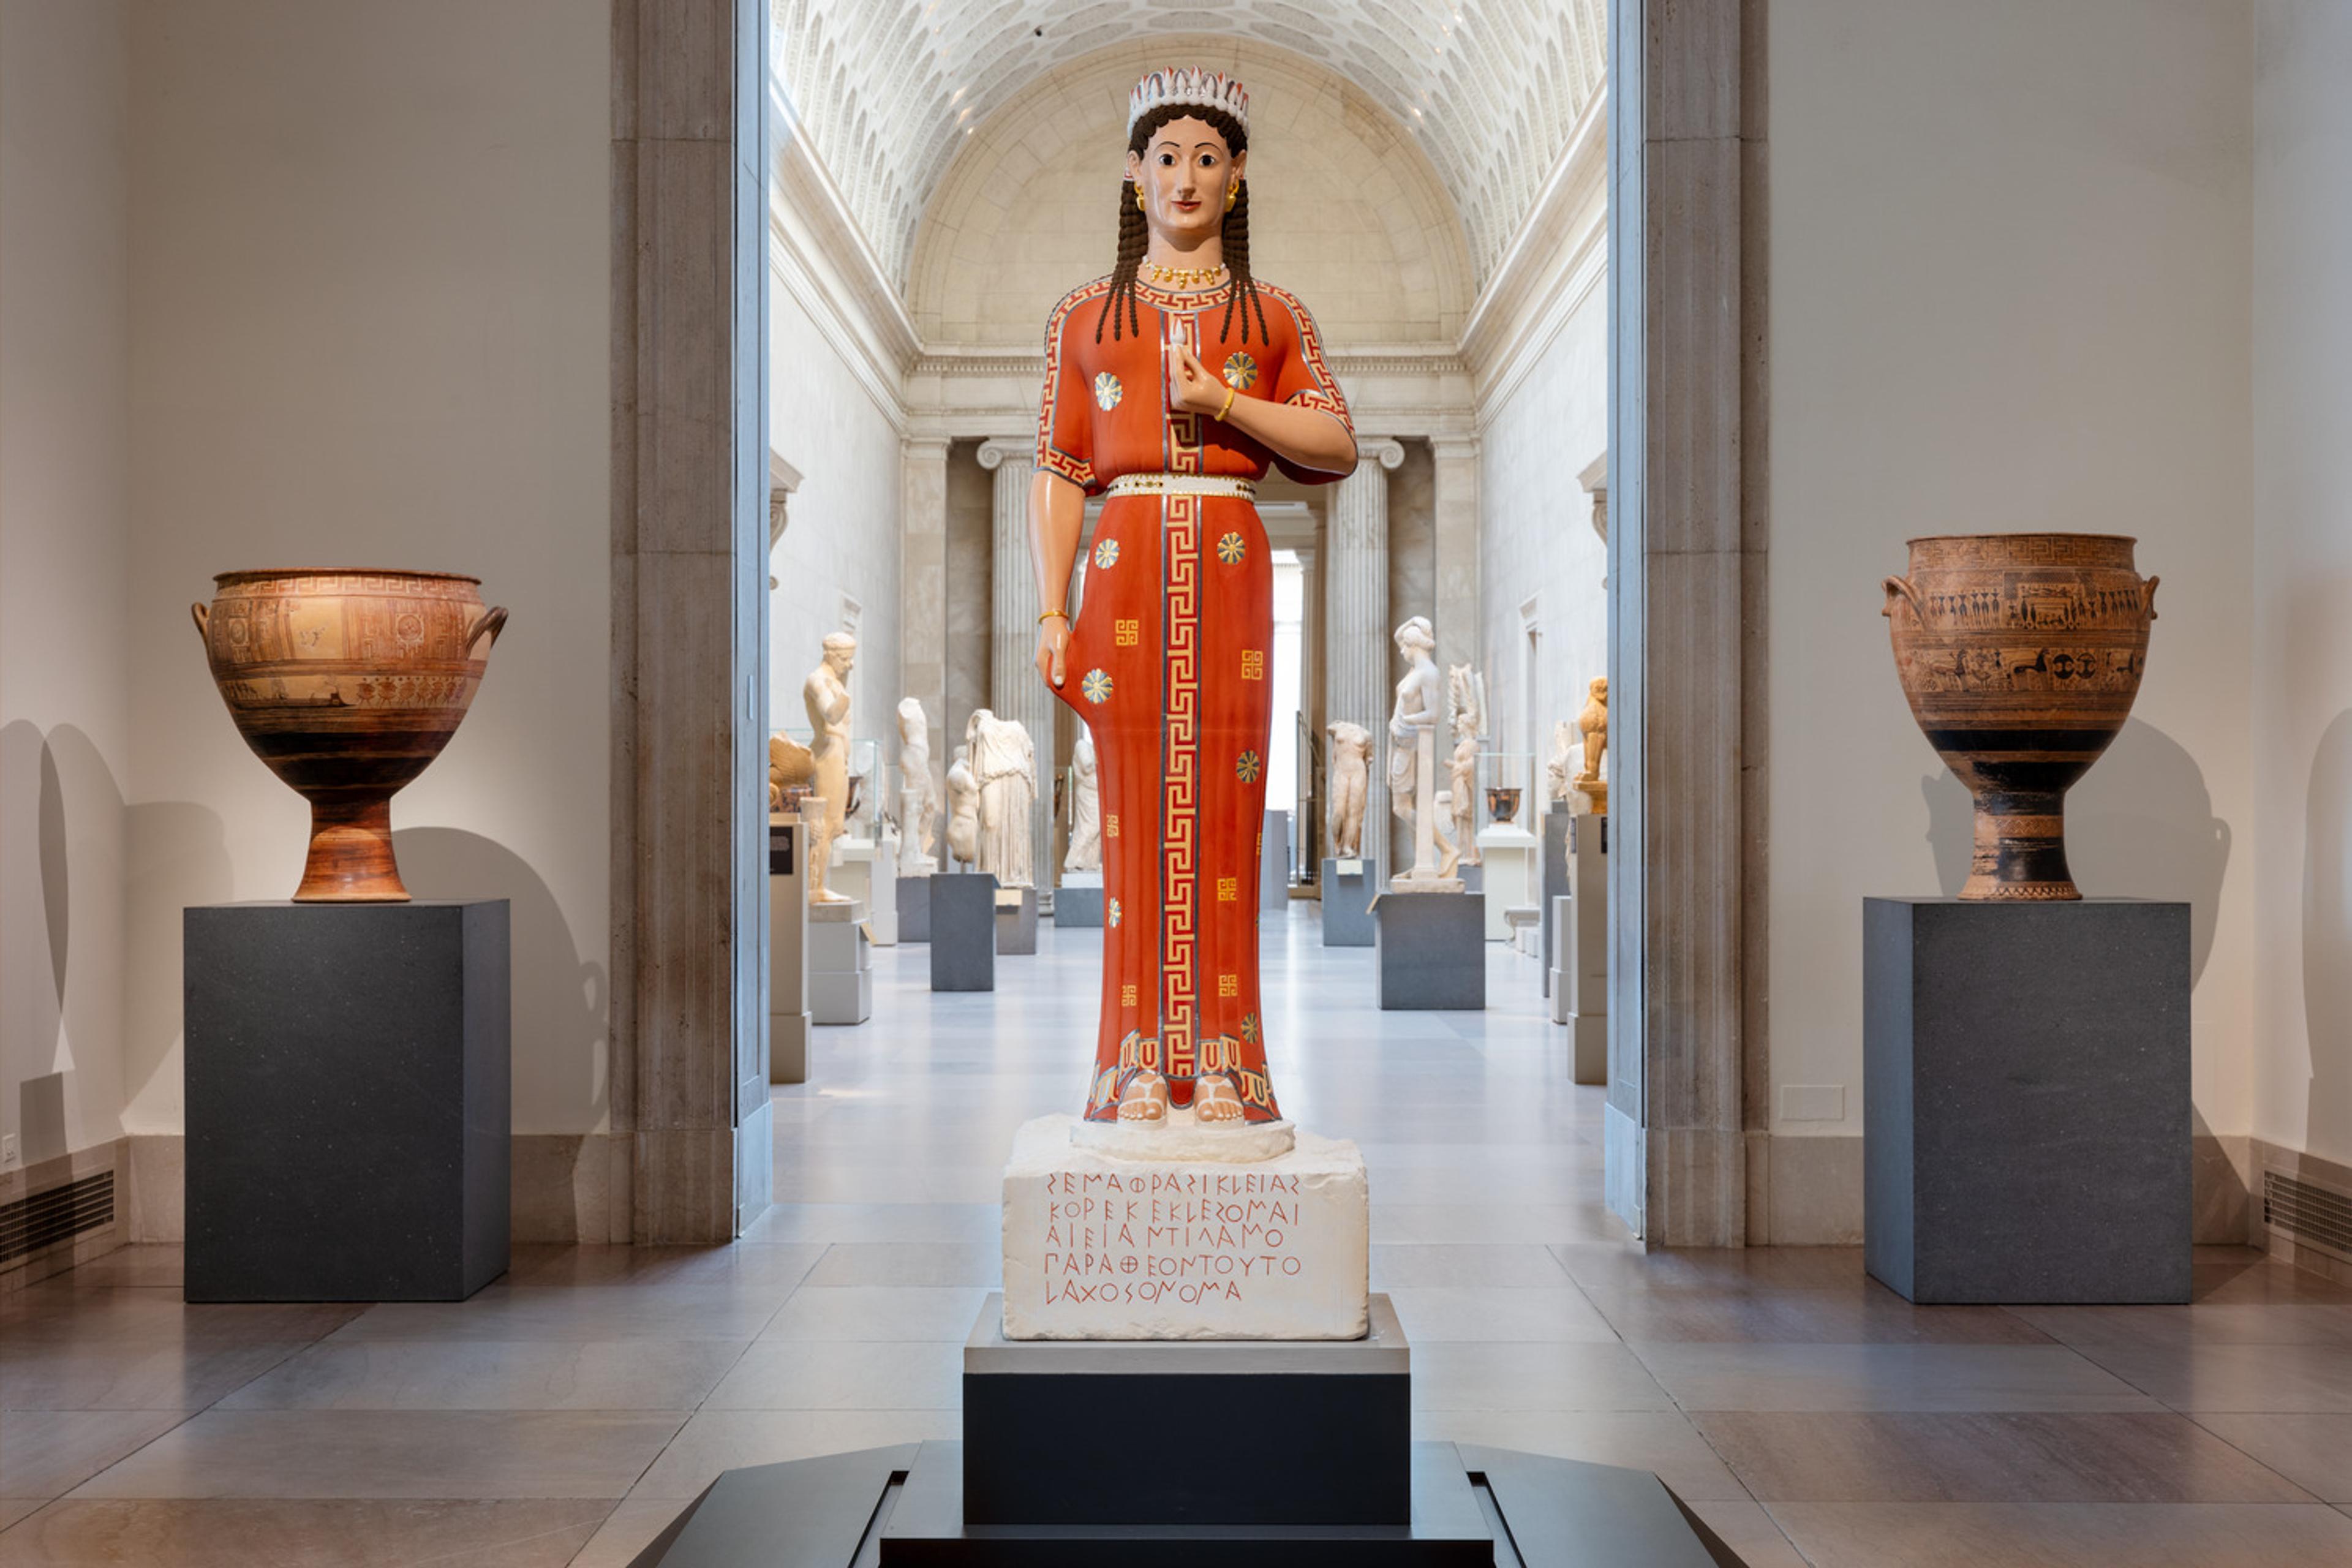 A polychrome statue of a woman in a read dress stands in stark contrast to the muted colors in The Met's Greek and Roman Galleries.